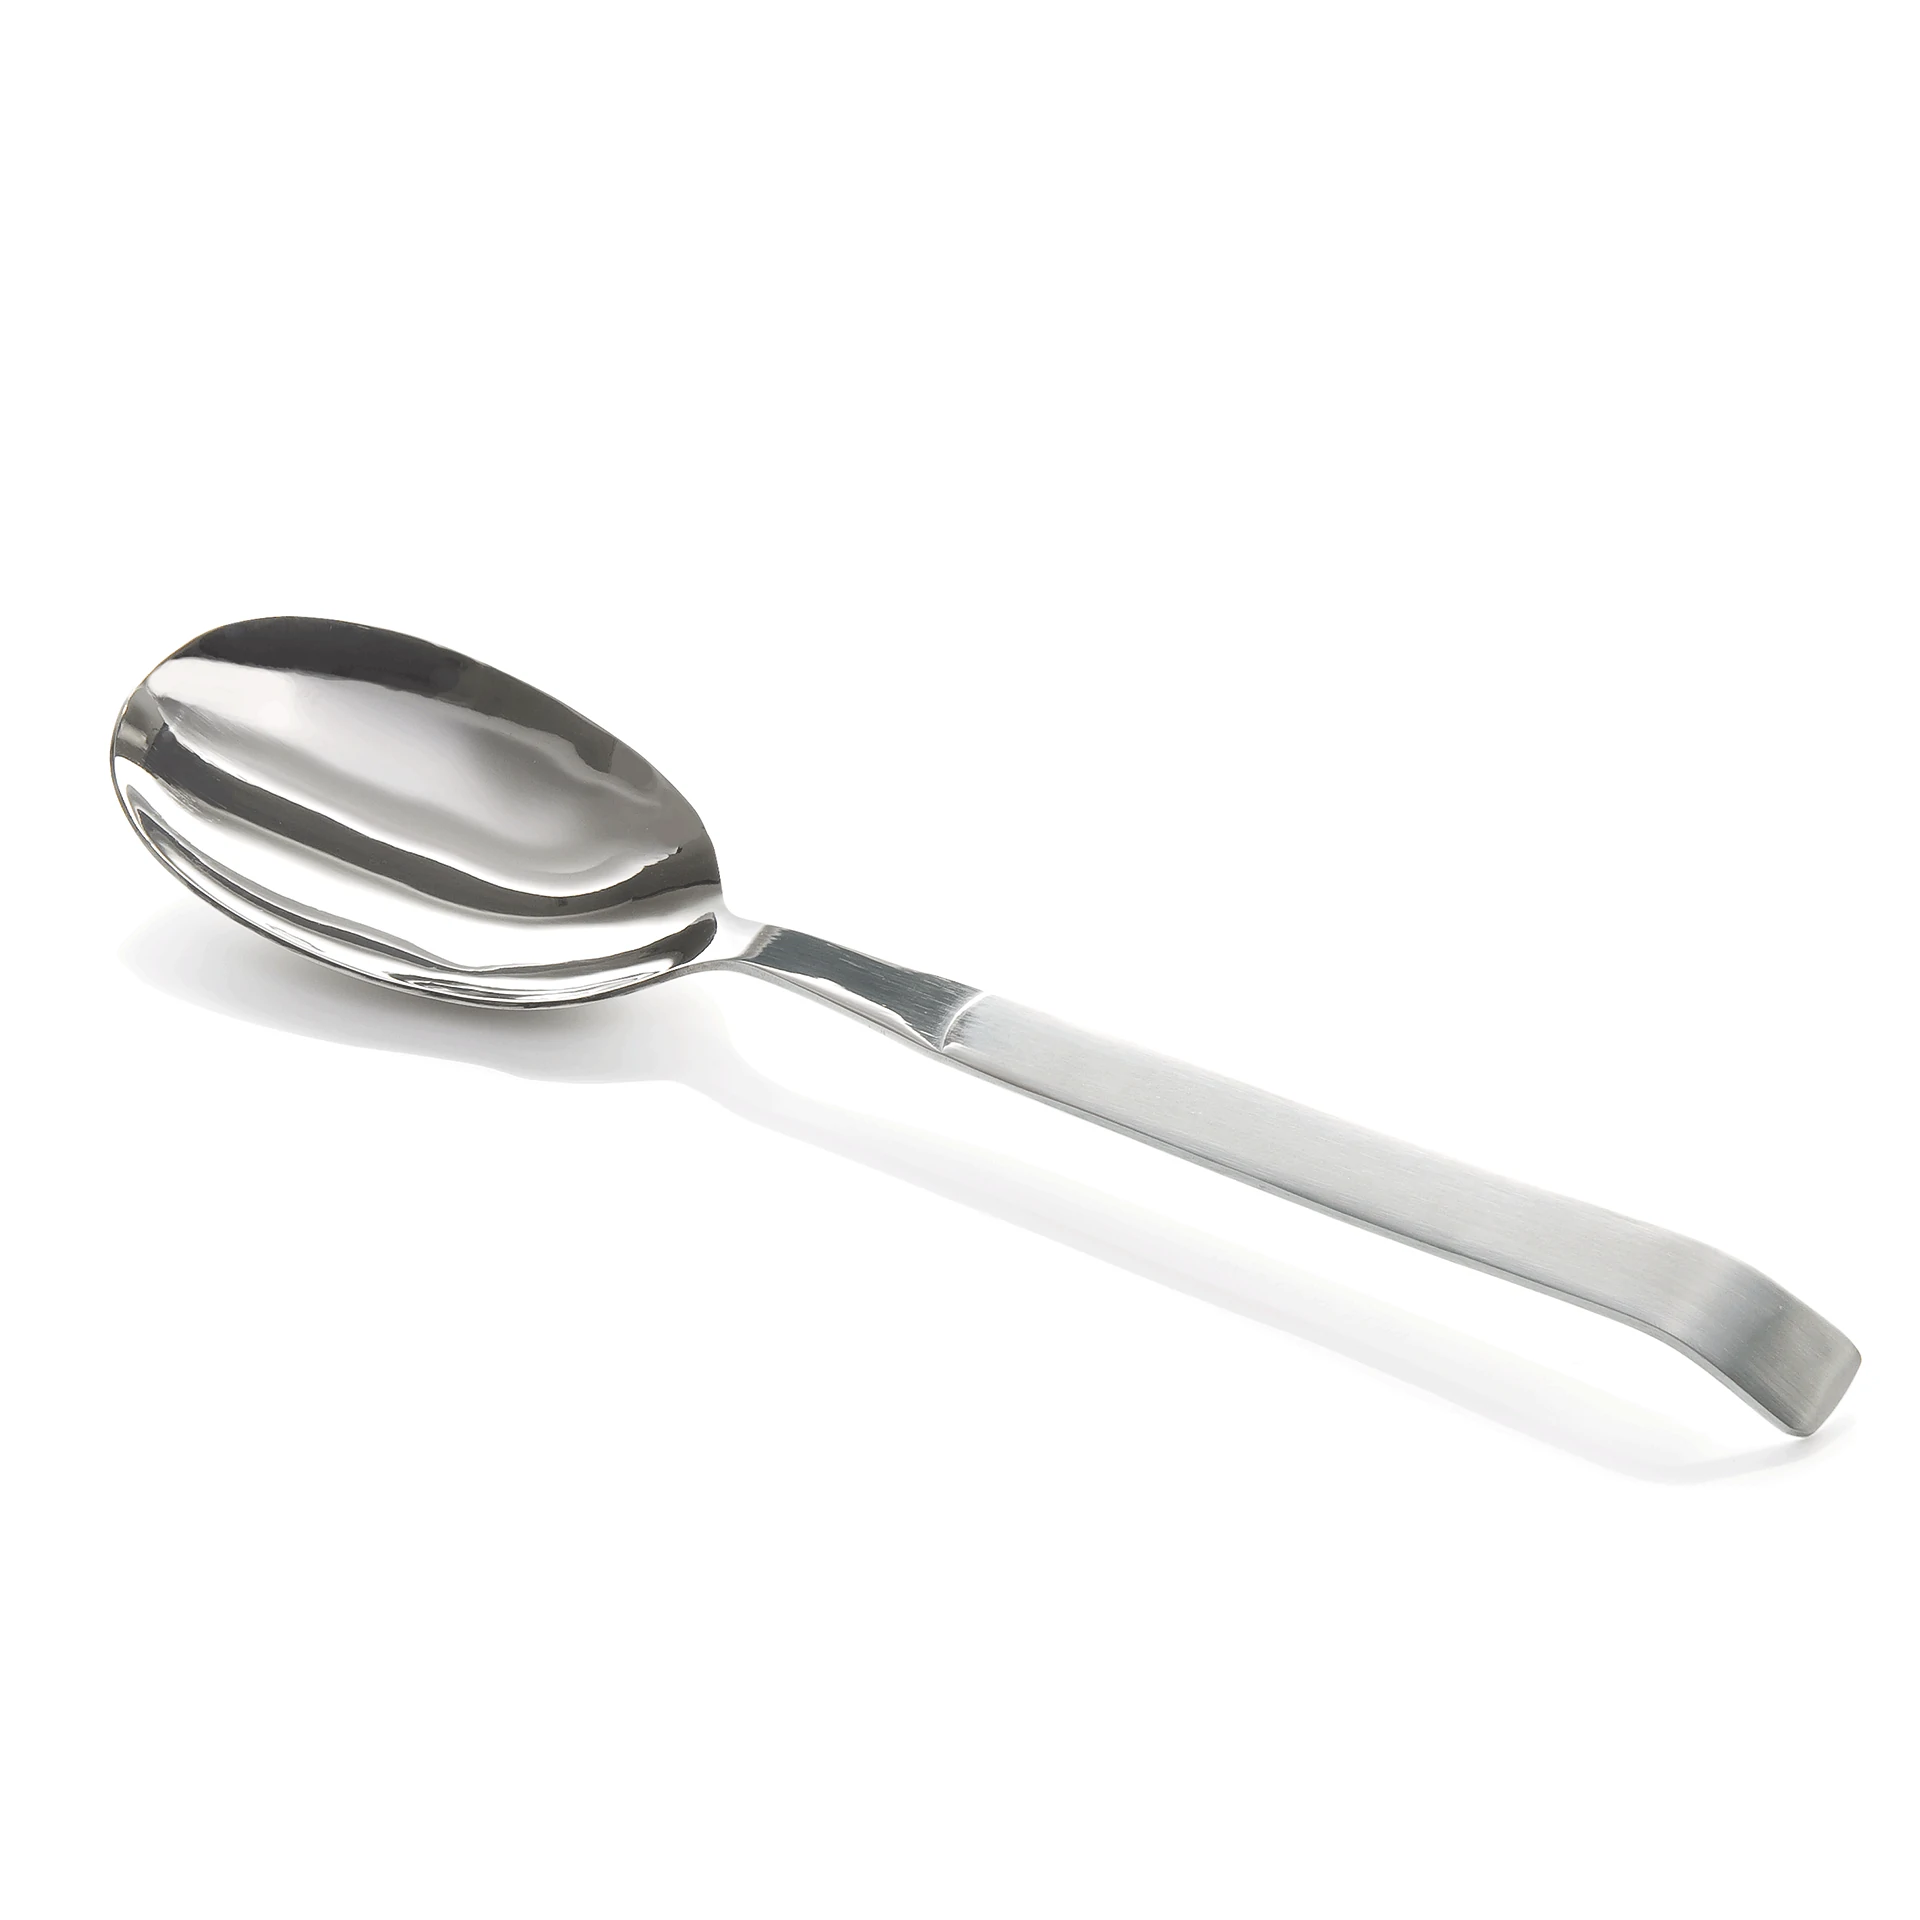 Serving spoon Kitchen Tool 2160